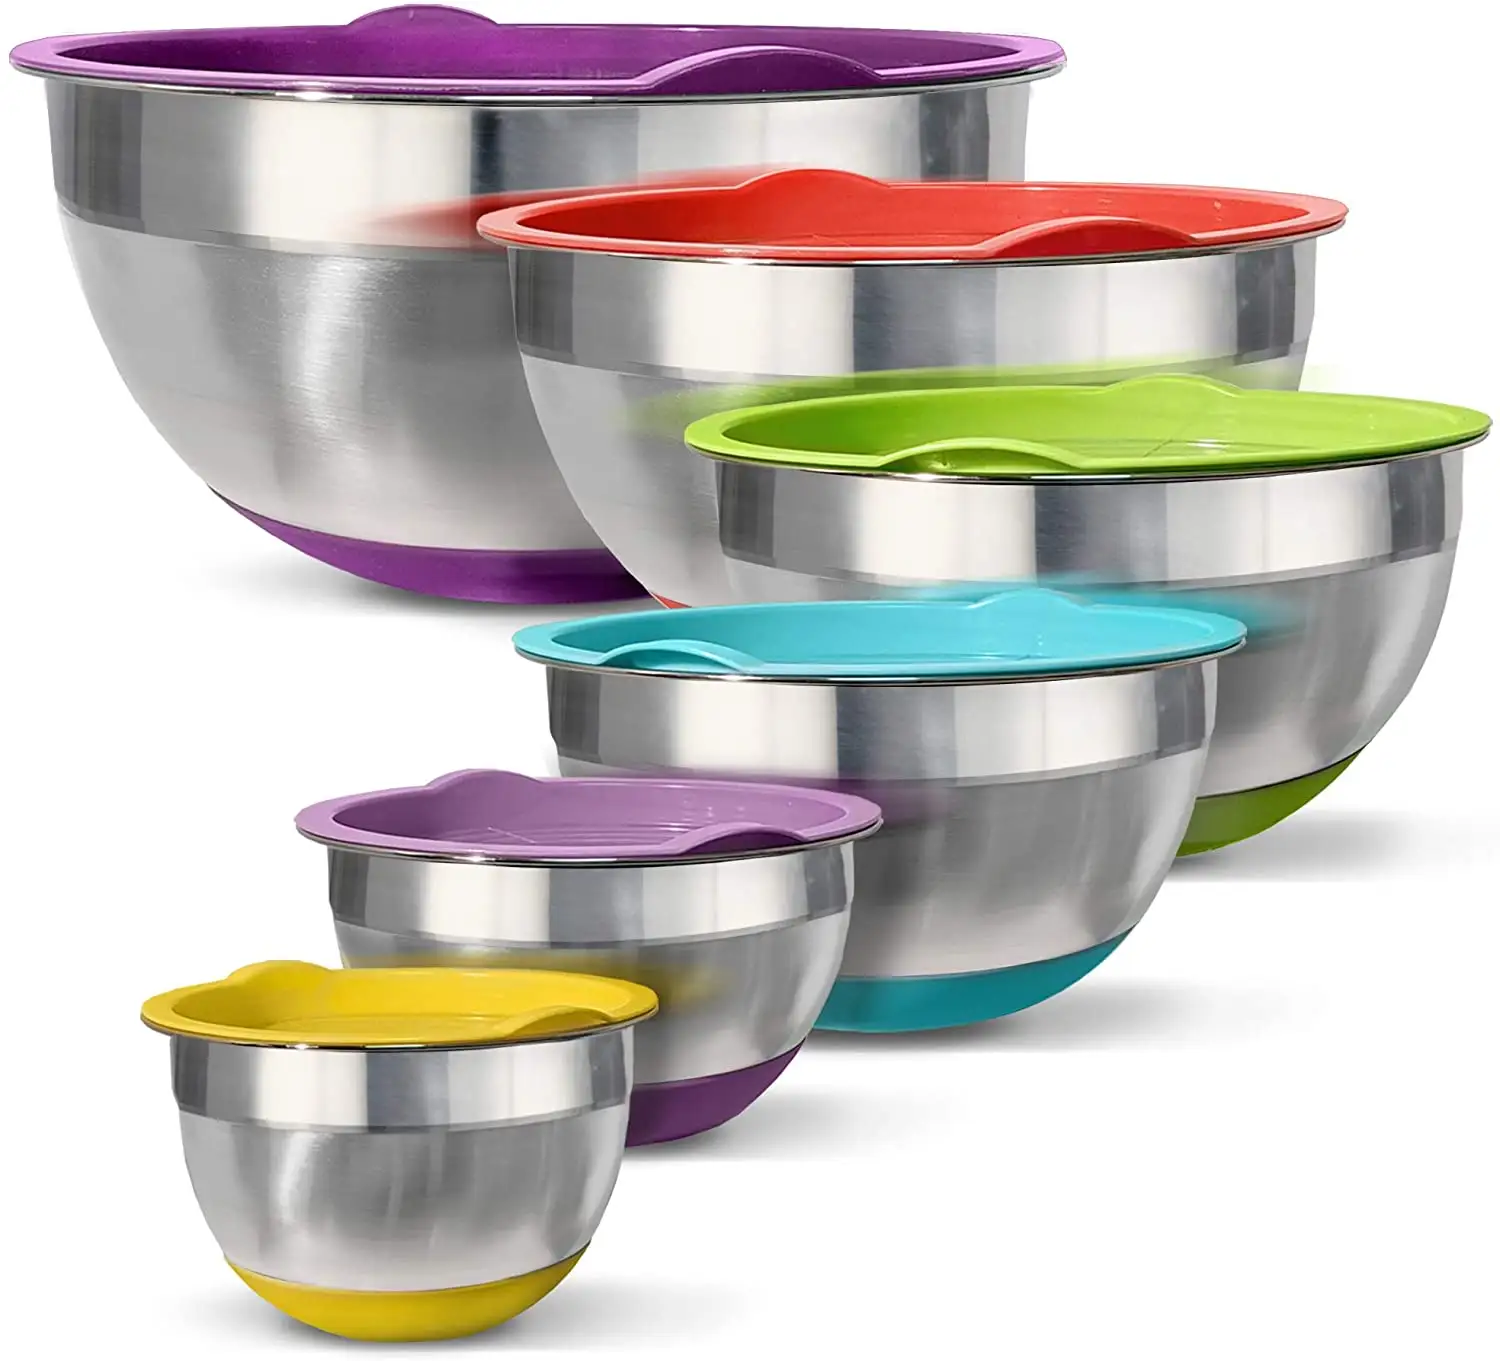 Home Kitchenware Non Slip Silicone Bottom Stainless Steel Salad Mixing Bowls Set with Airtight Lids